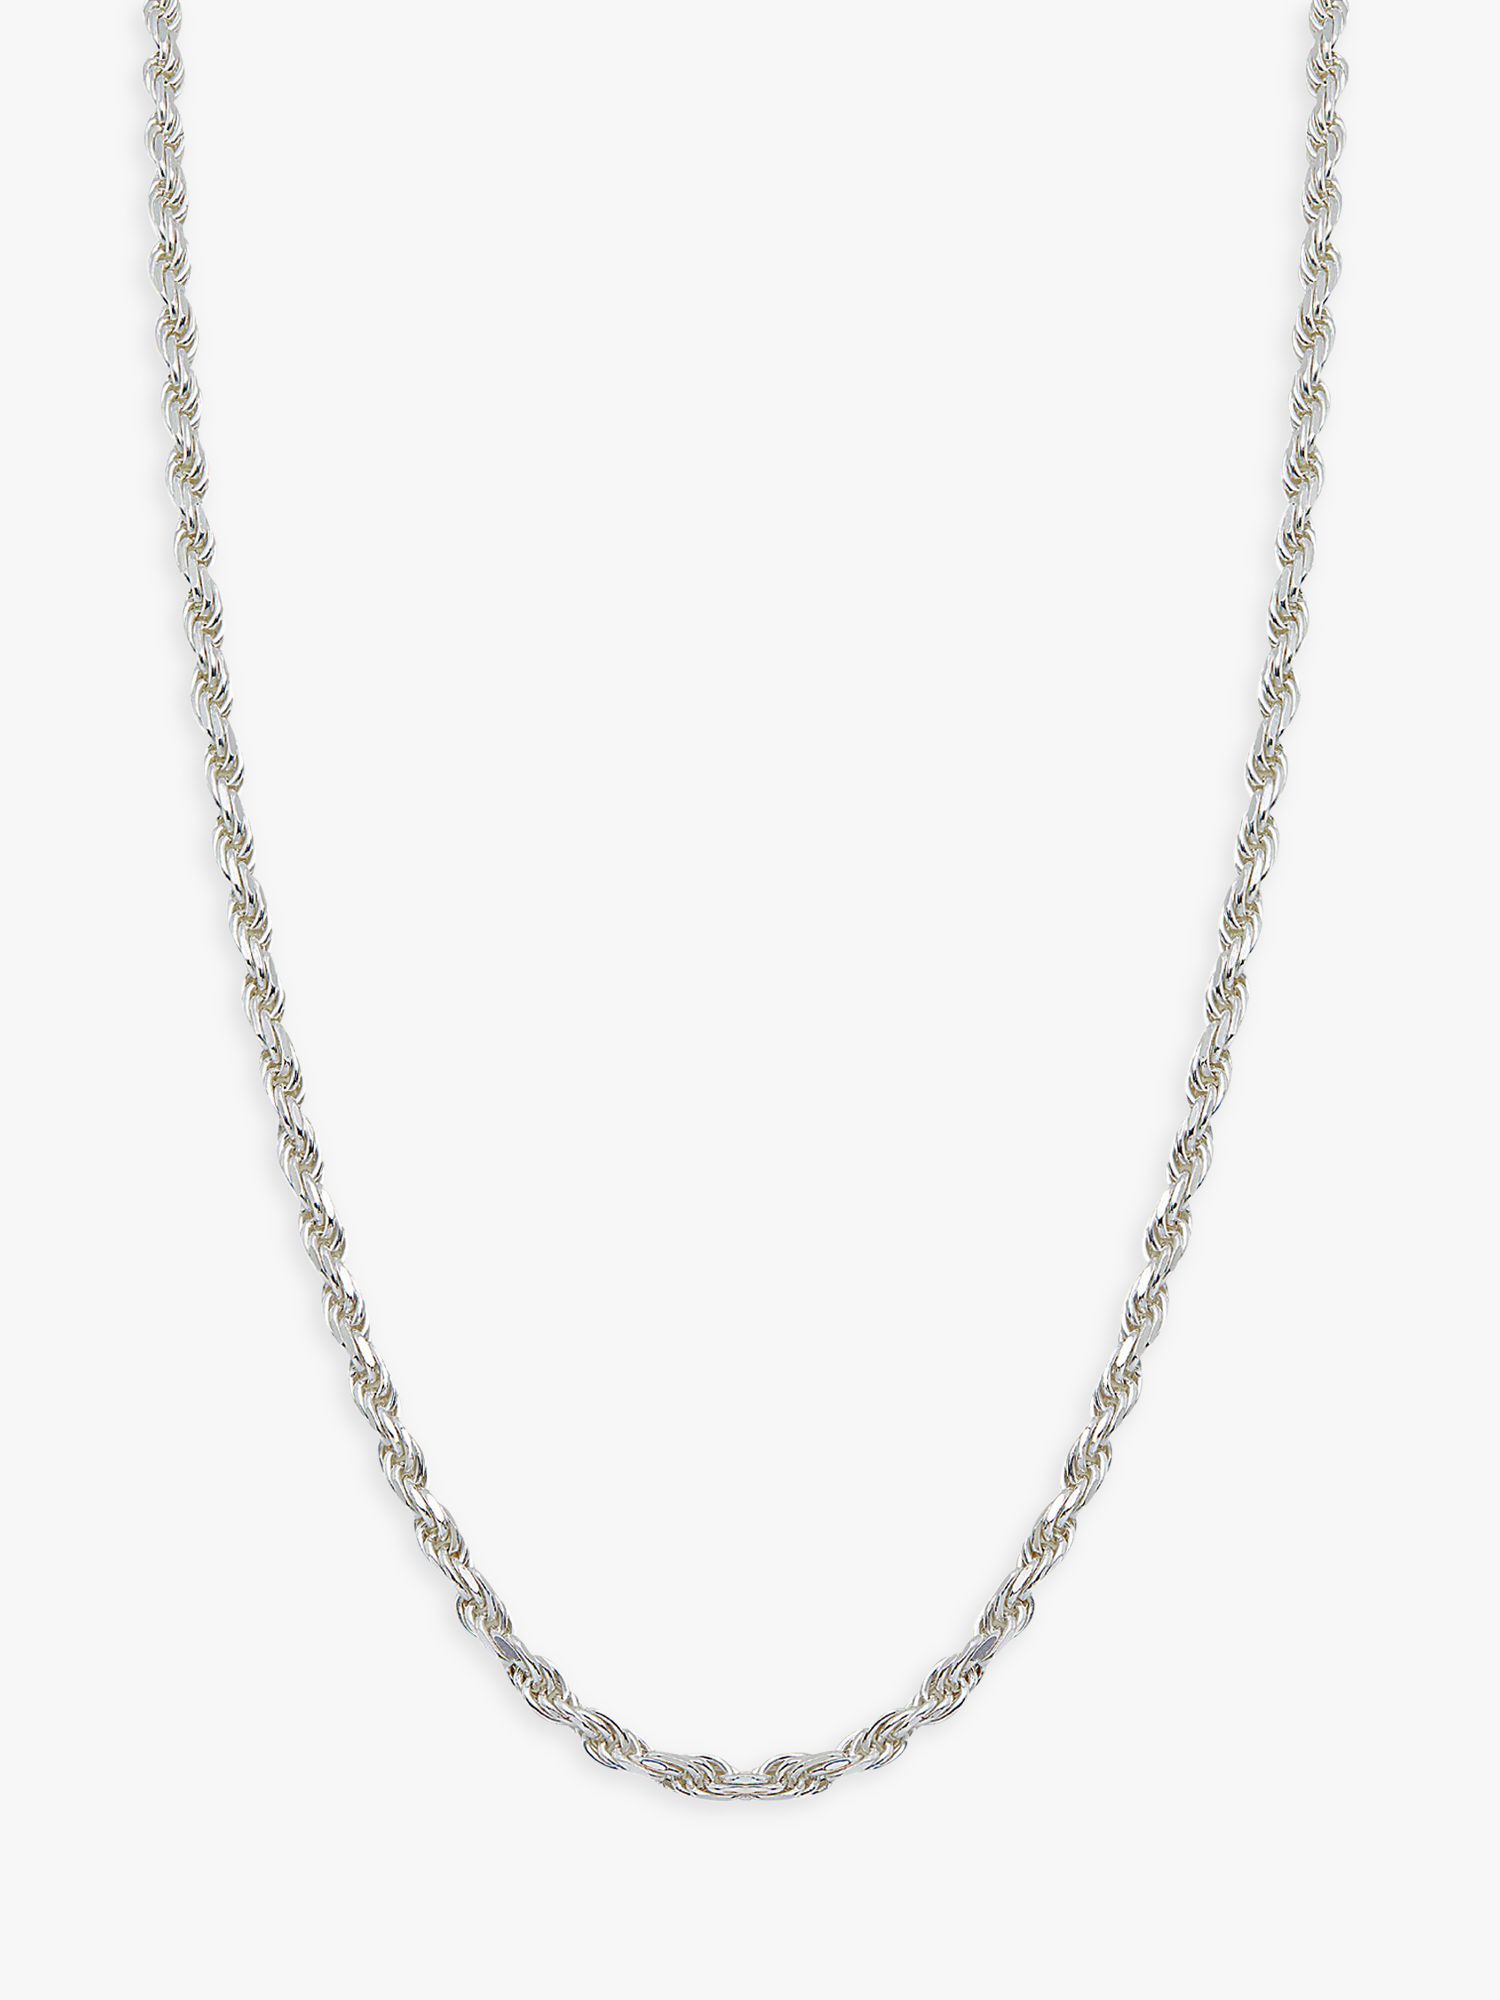 Simply Silver Small Rope Chain Necklace, Silver